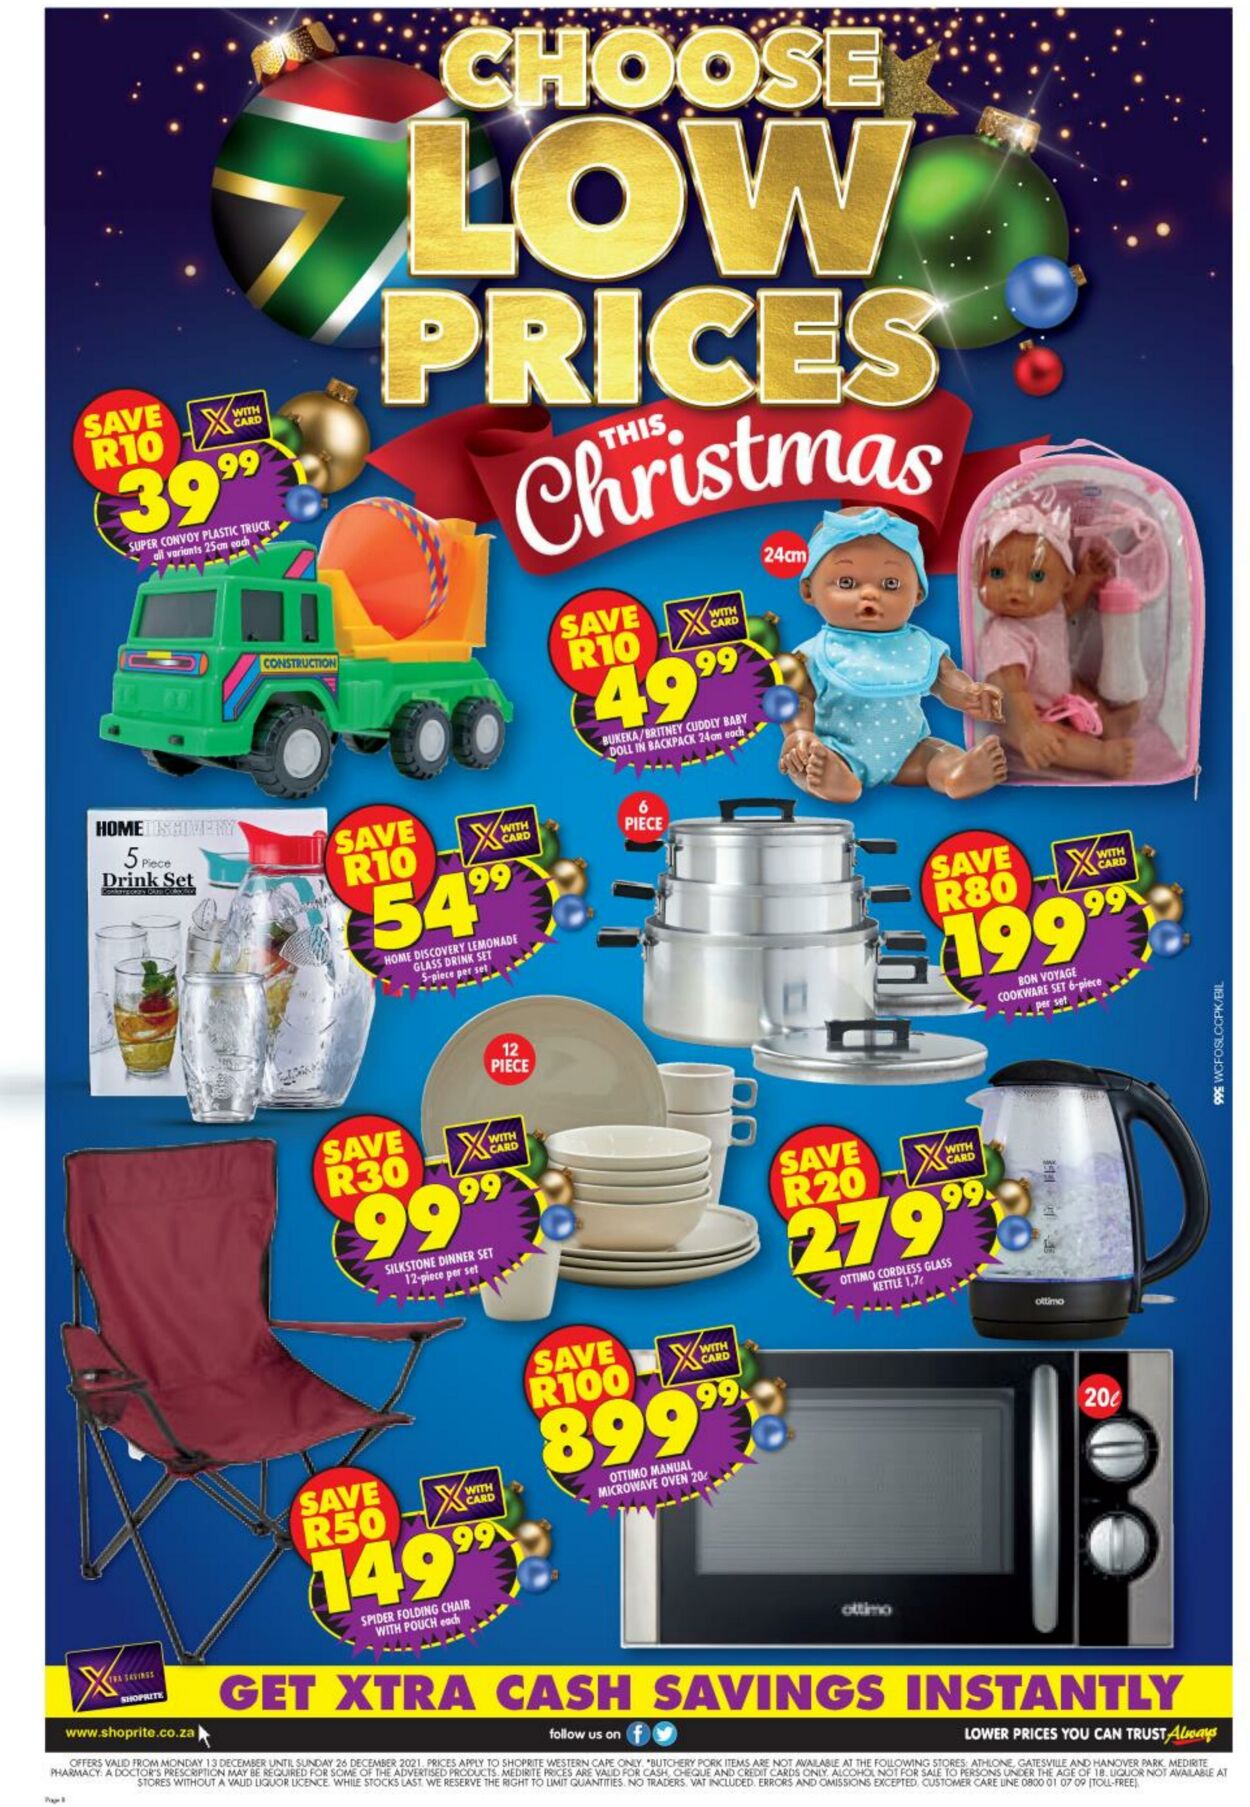 Current special Shoprite Christmas 2021 Valid from 13.12 to 26.12